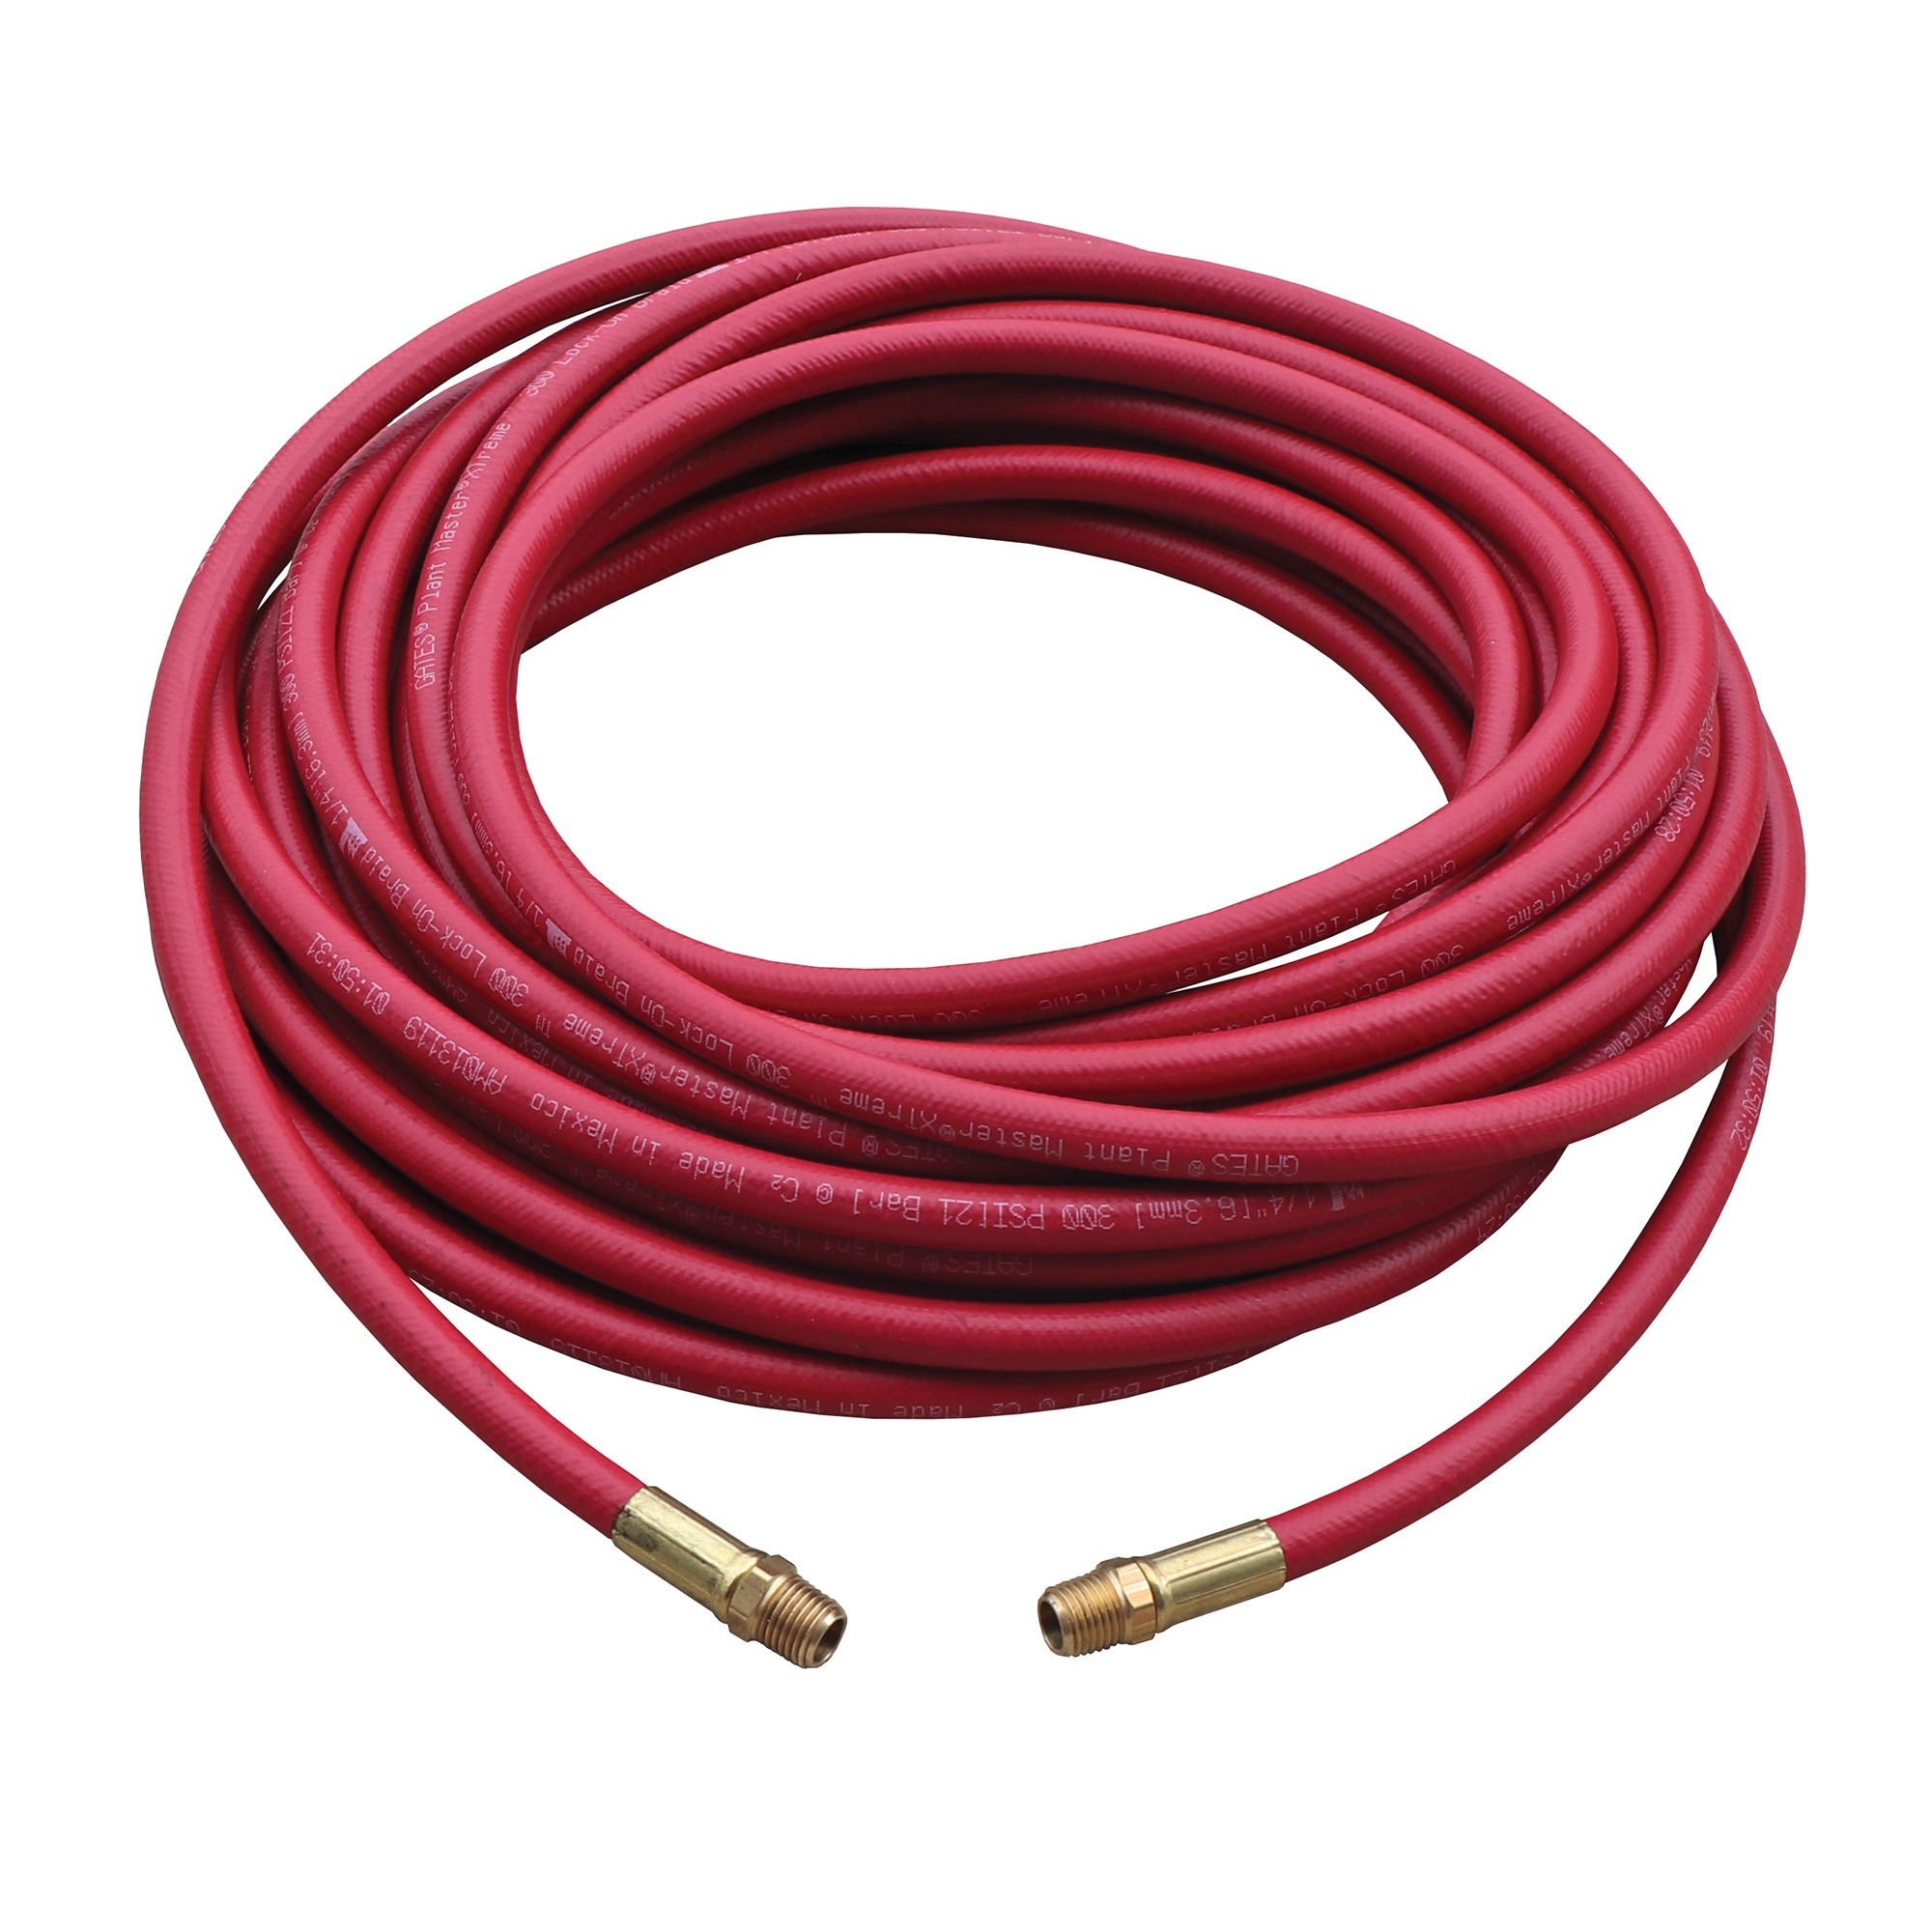 50 ft. x 1/4 in. Air Hose